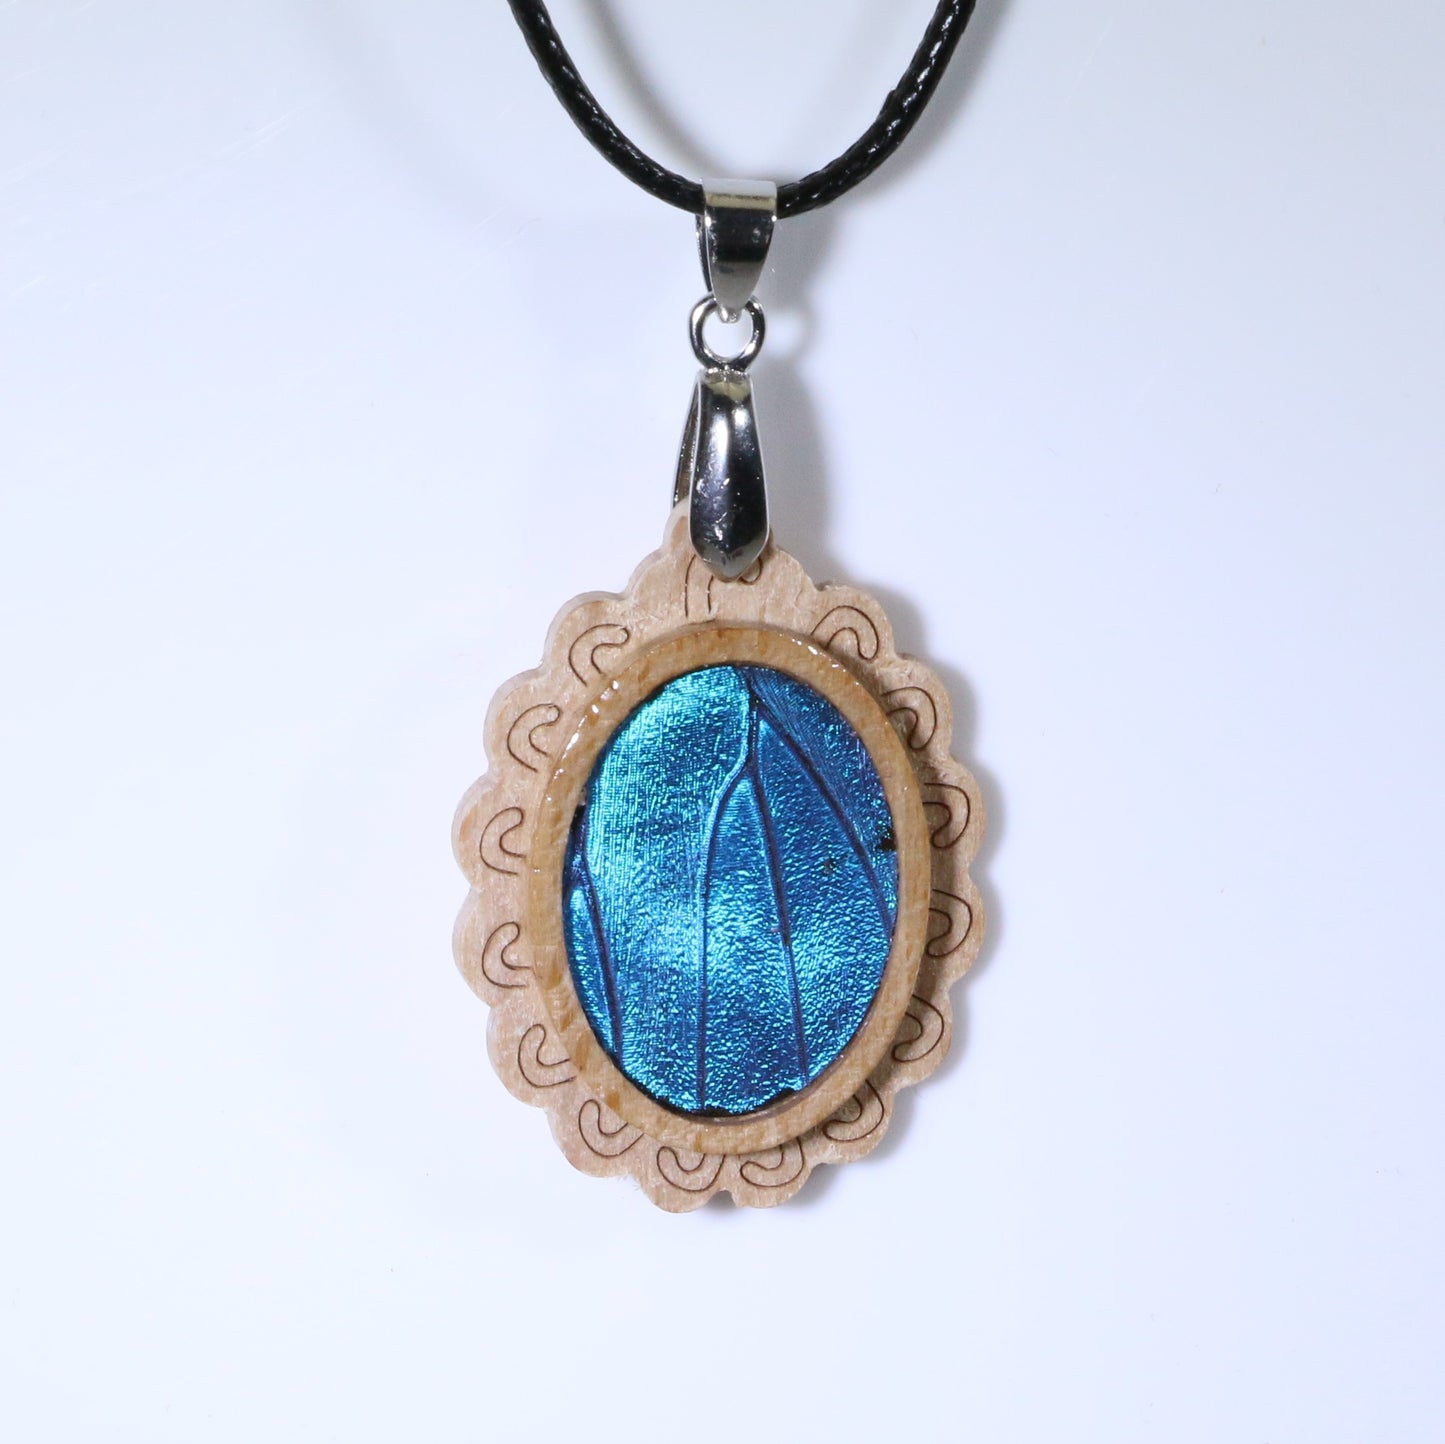 52701 - Real Butterfly Wing Jewelry - Pendant - Tan Wood - Oval - Filigree - Blue Morpho